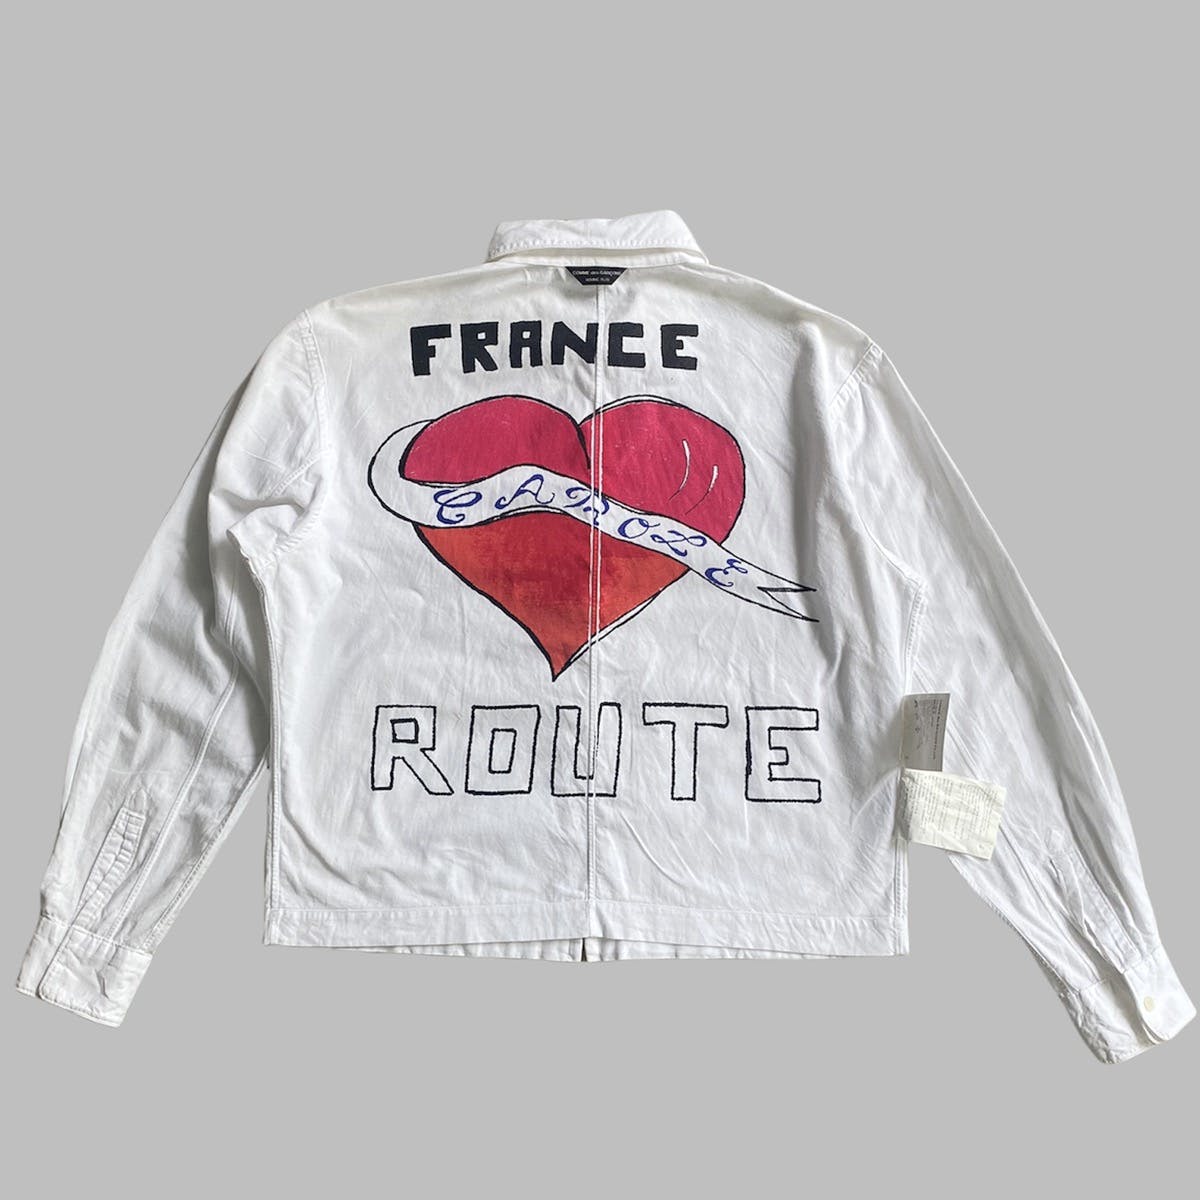 SS04 CDGHP France Route “Carole” Jacket - 1